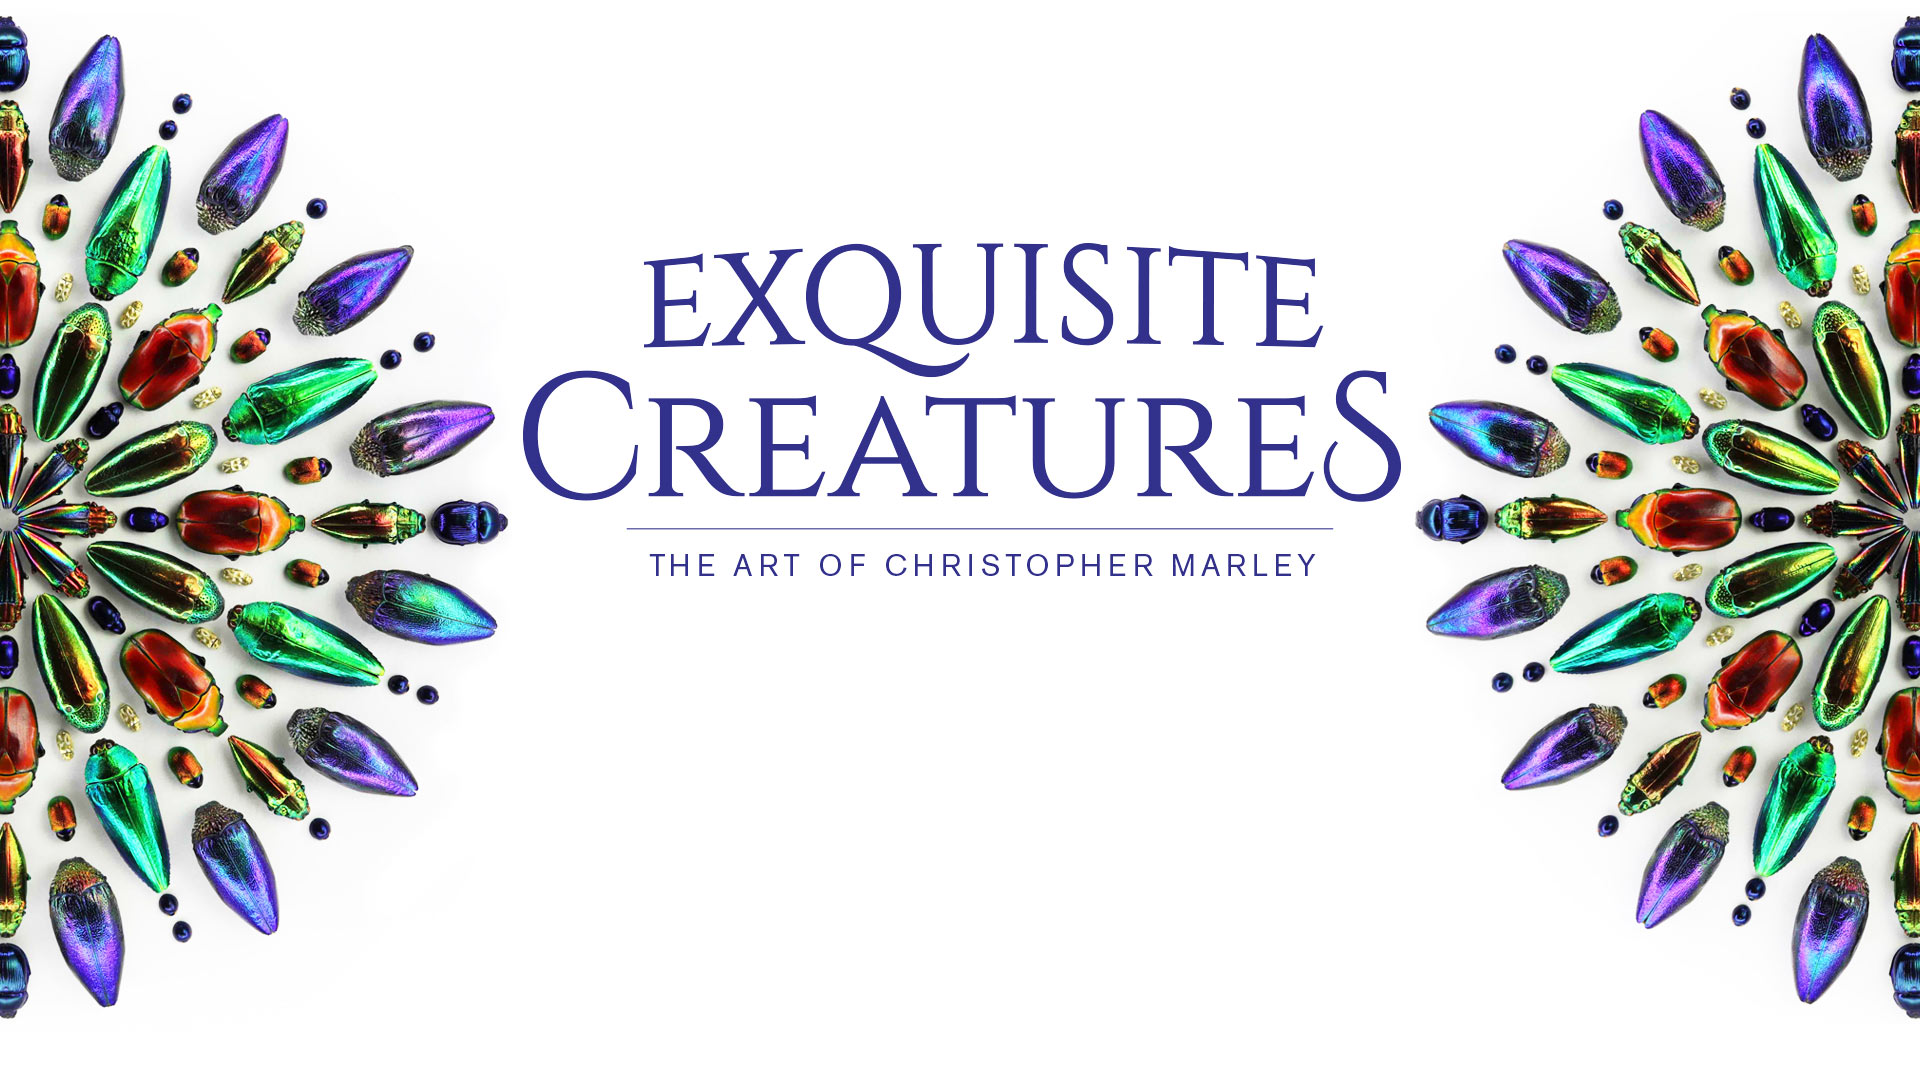 Exquisite Creatures: The Art of Christopher Marley